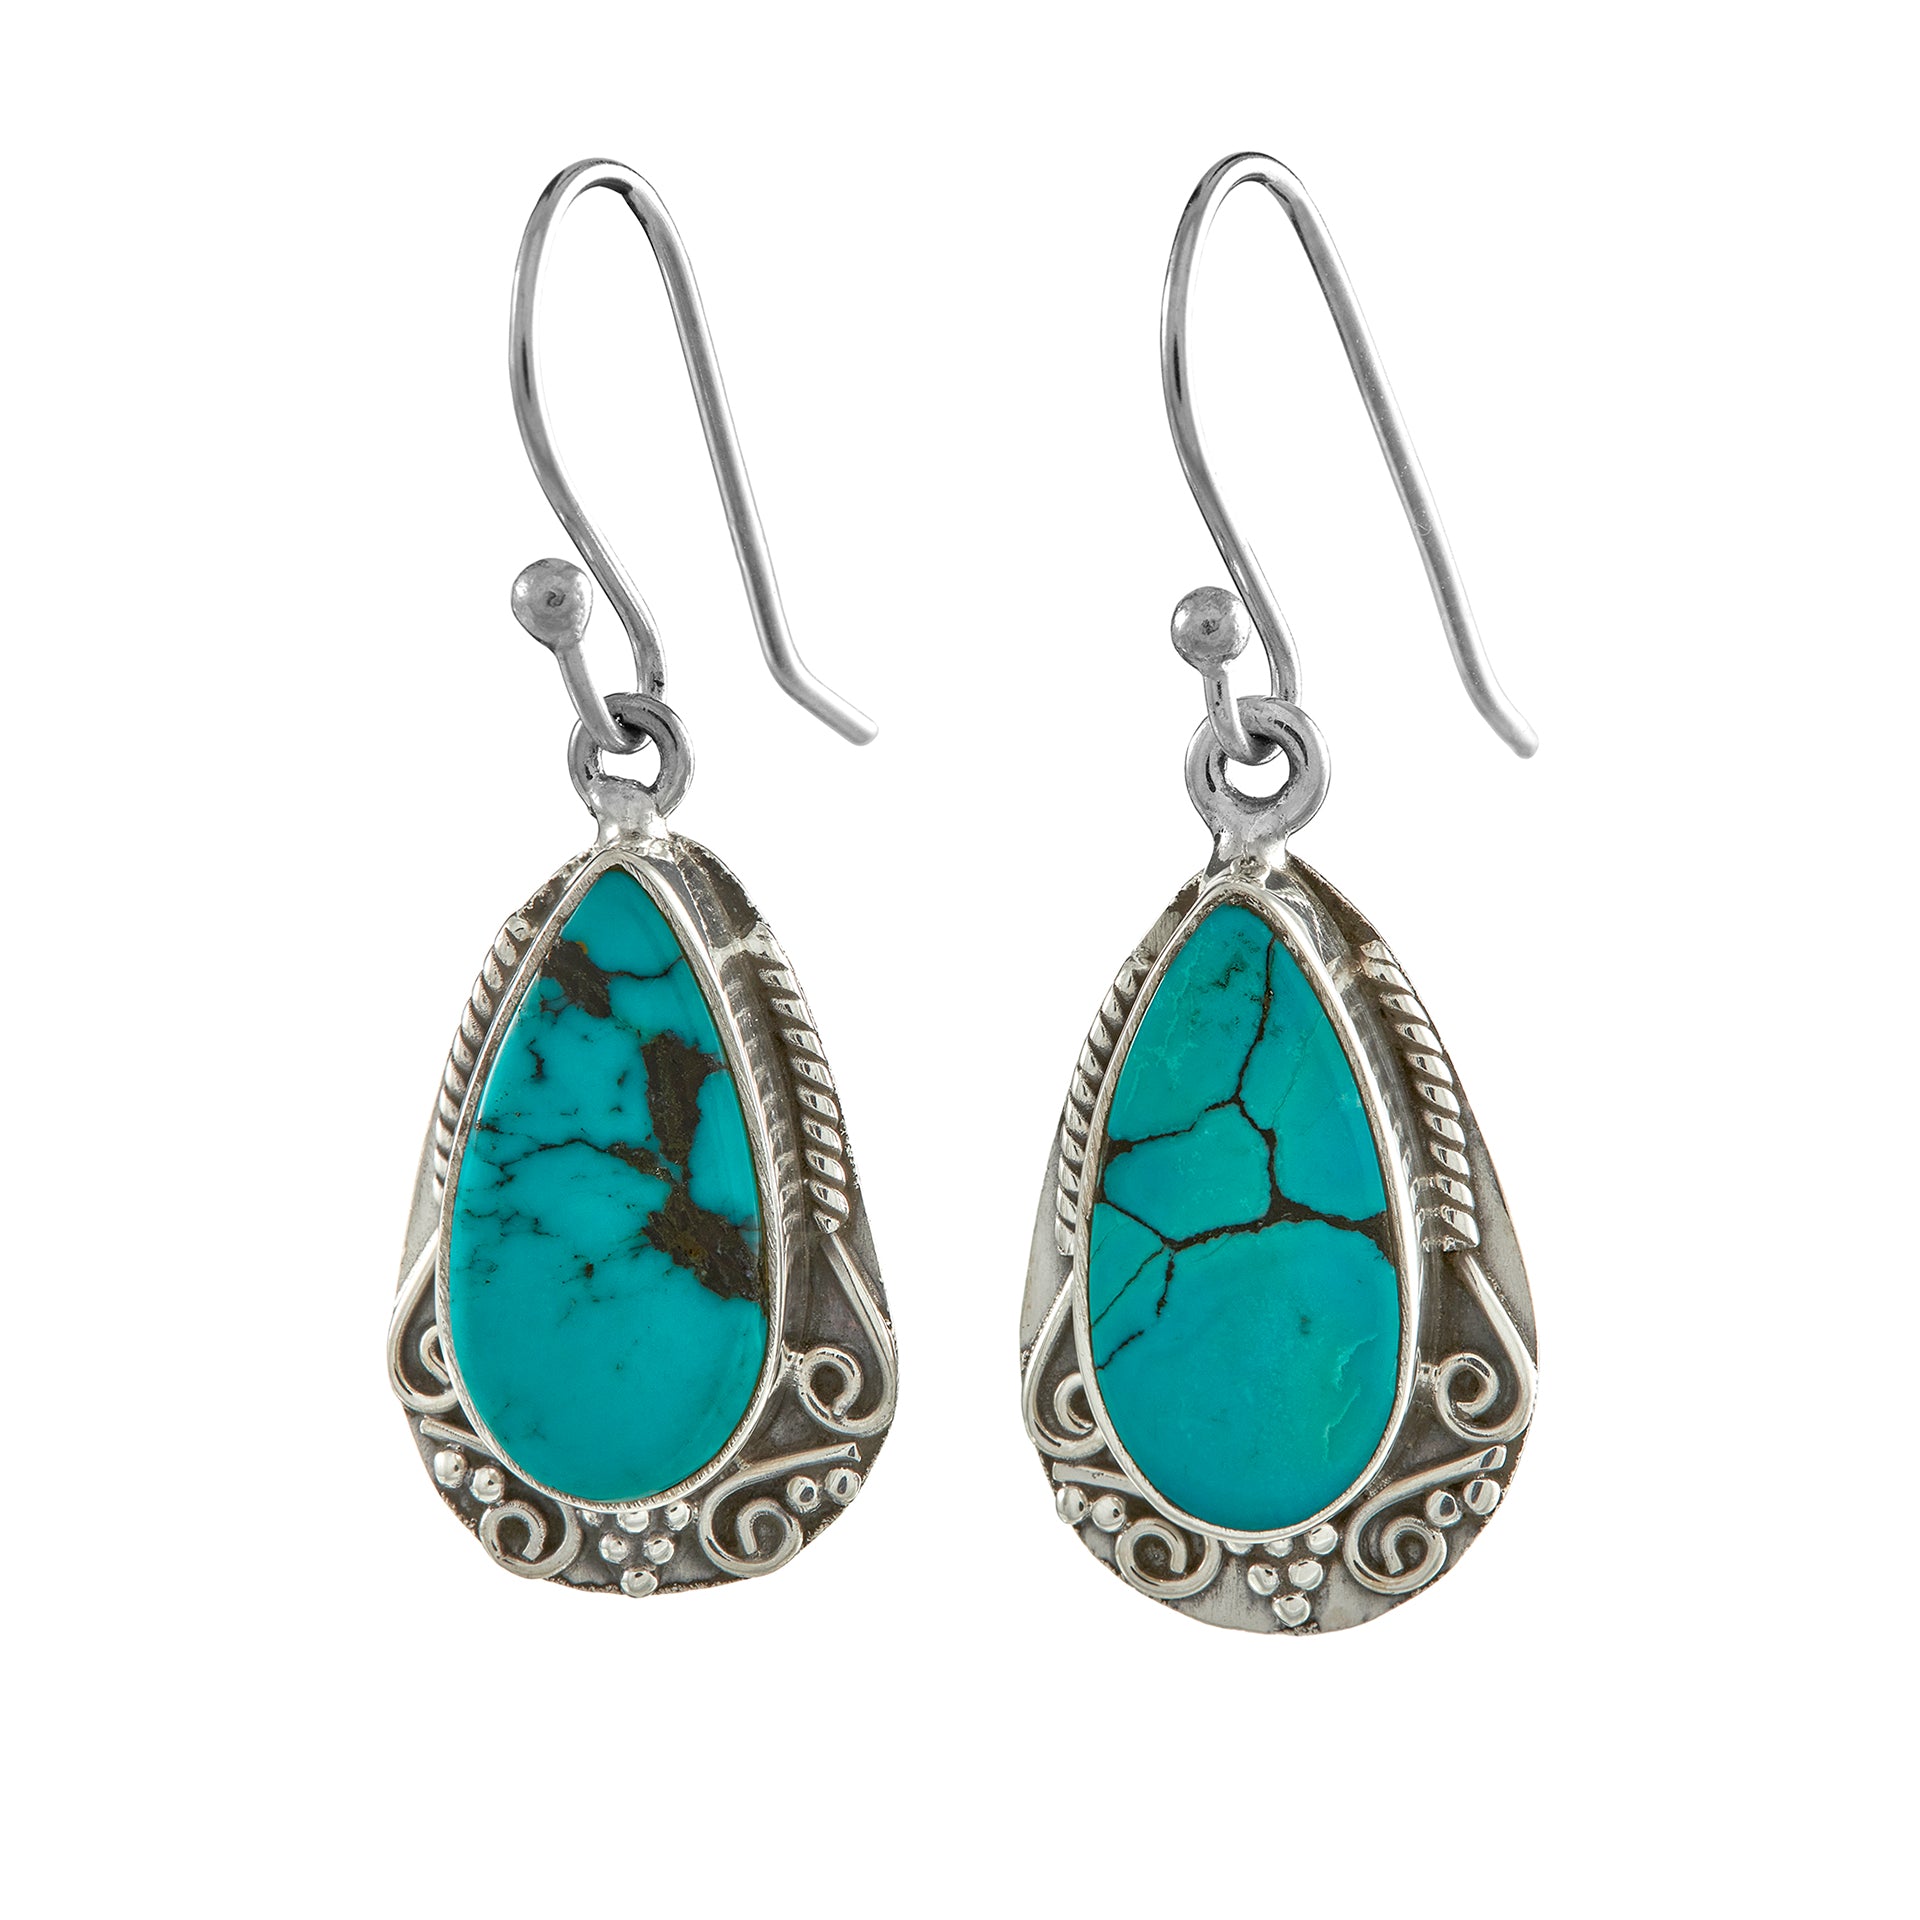 Decorated Turquoise earrings